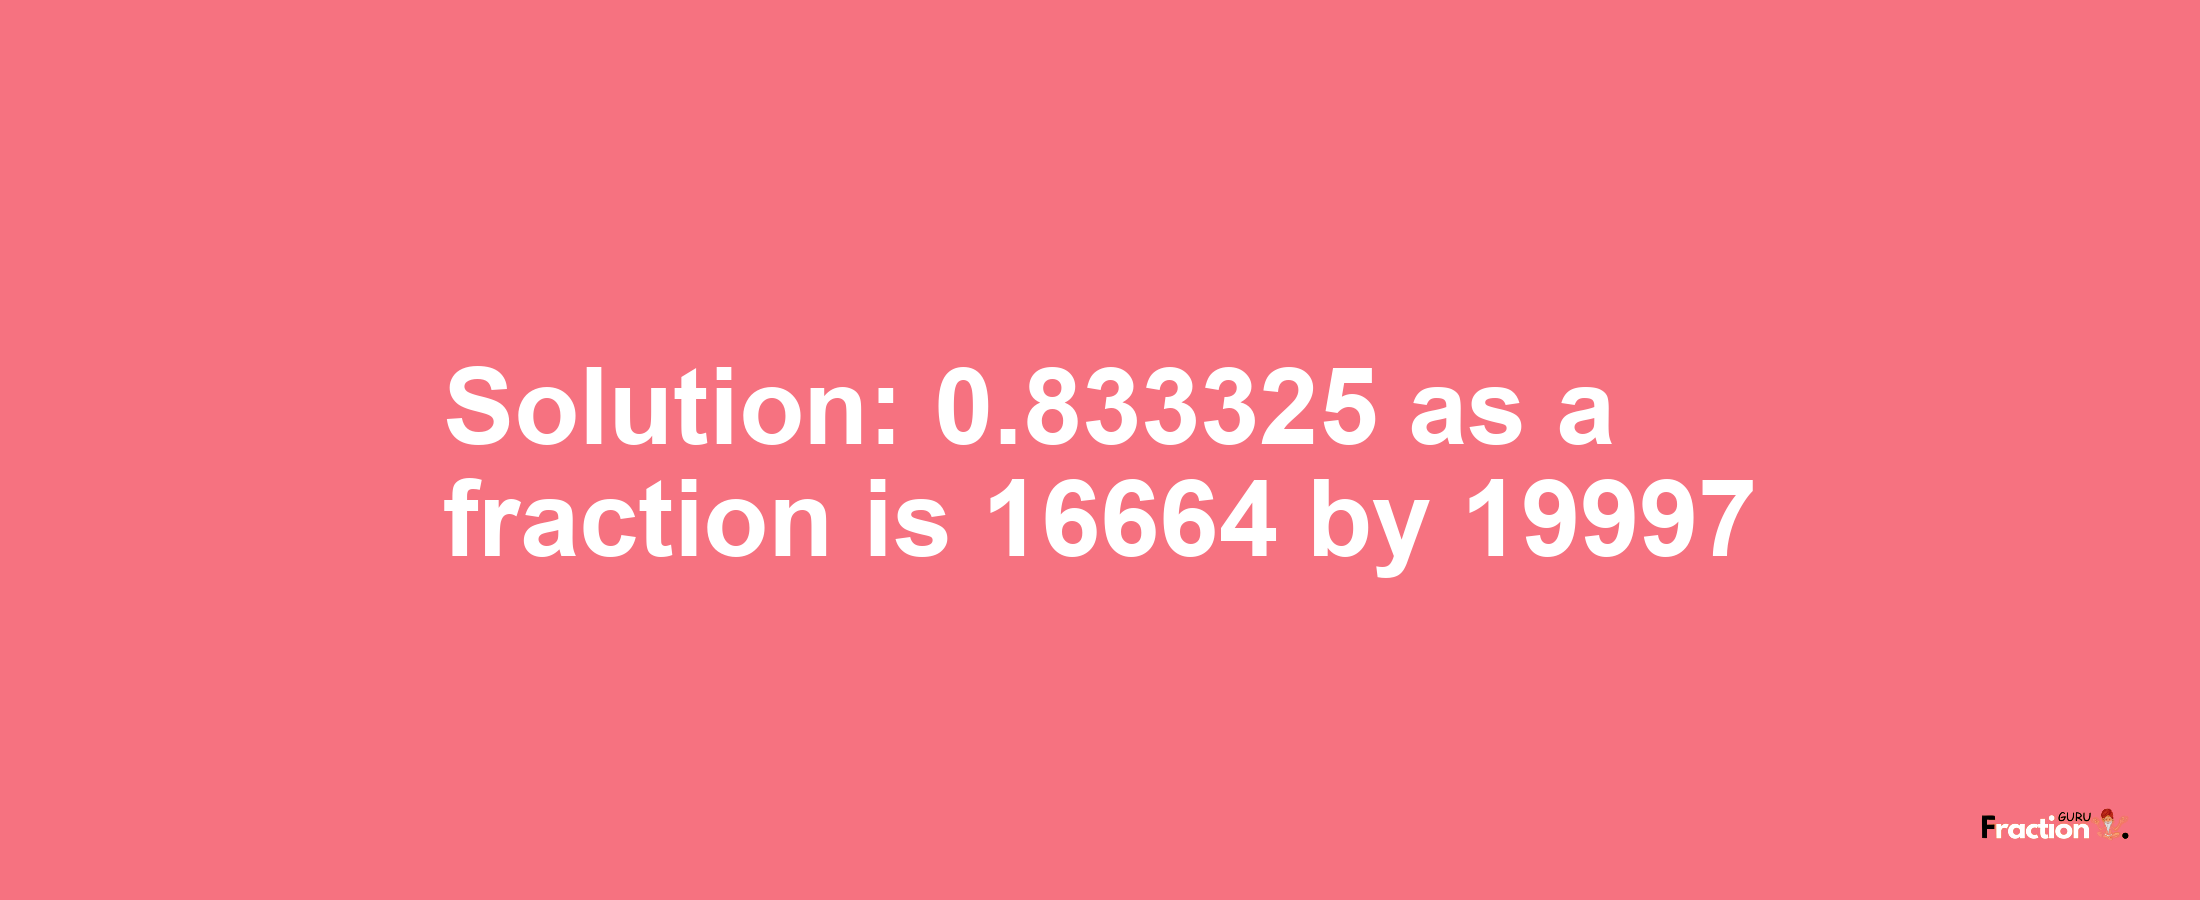 Solution:0.833325 as a fraction is 16664/19997